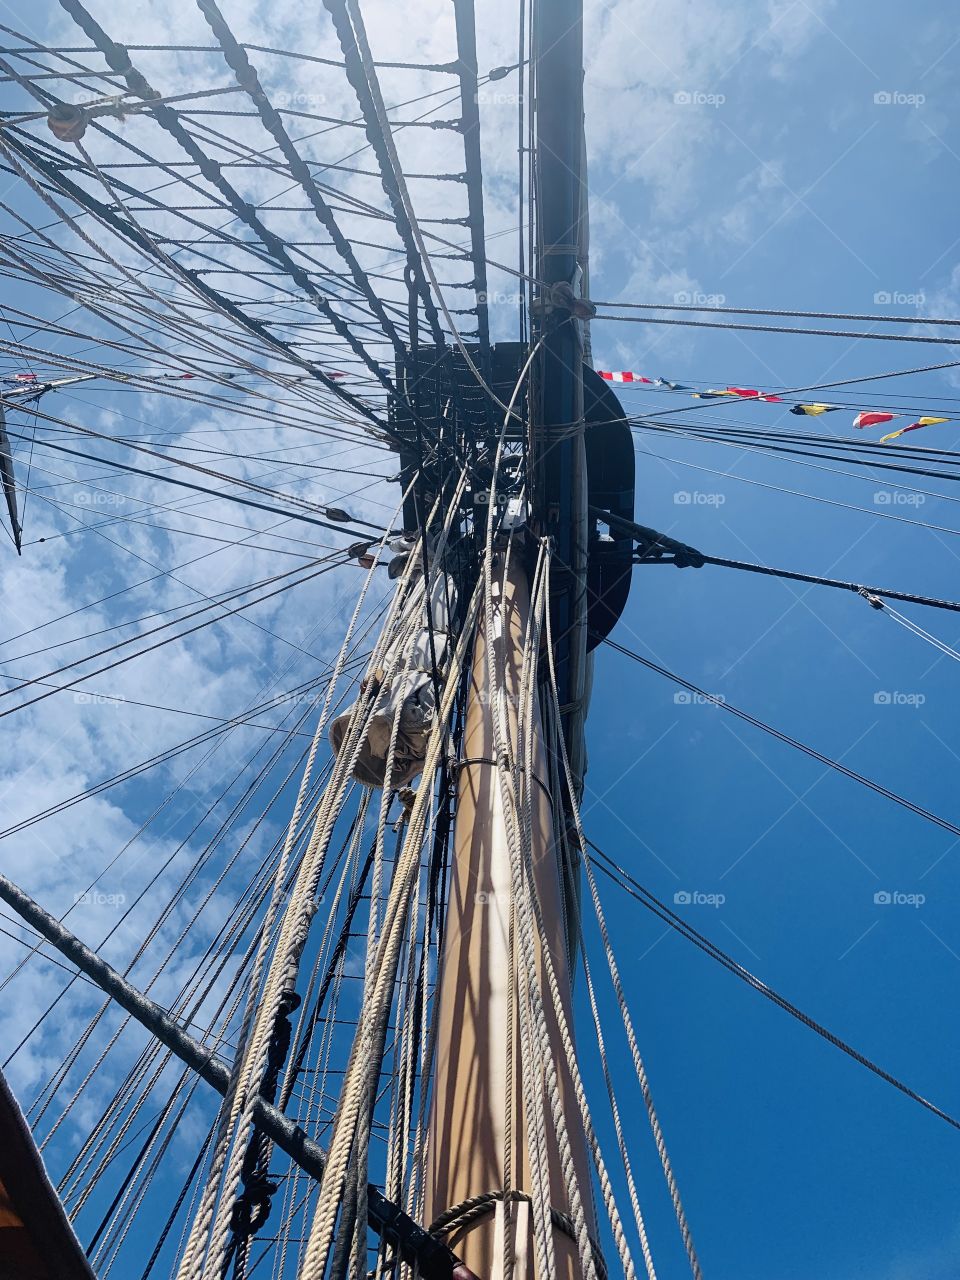 Brig Niagara, Tall Ships. With 6 miles of rope and 188 Tons of sail power this ship stands tall with pride & history. Helping to win the war of 1812, this shot accentuates the knowledge needed to sail. Beautiful Erie skies contrast the miles of rope.